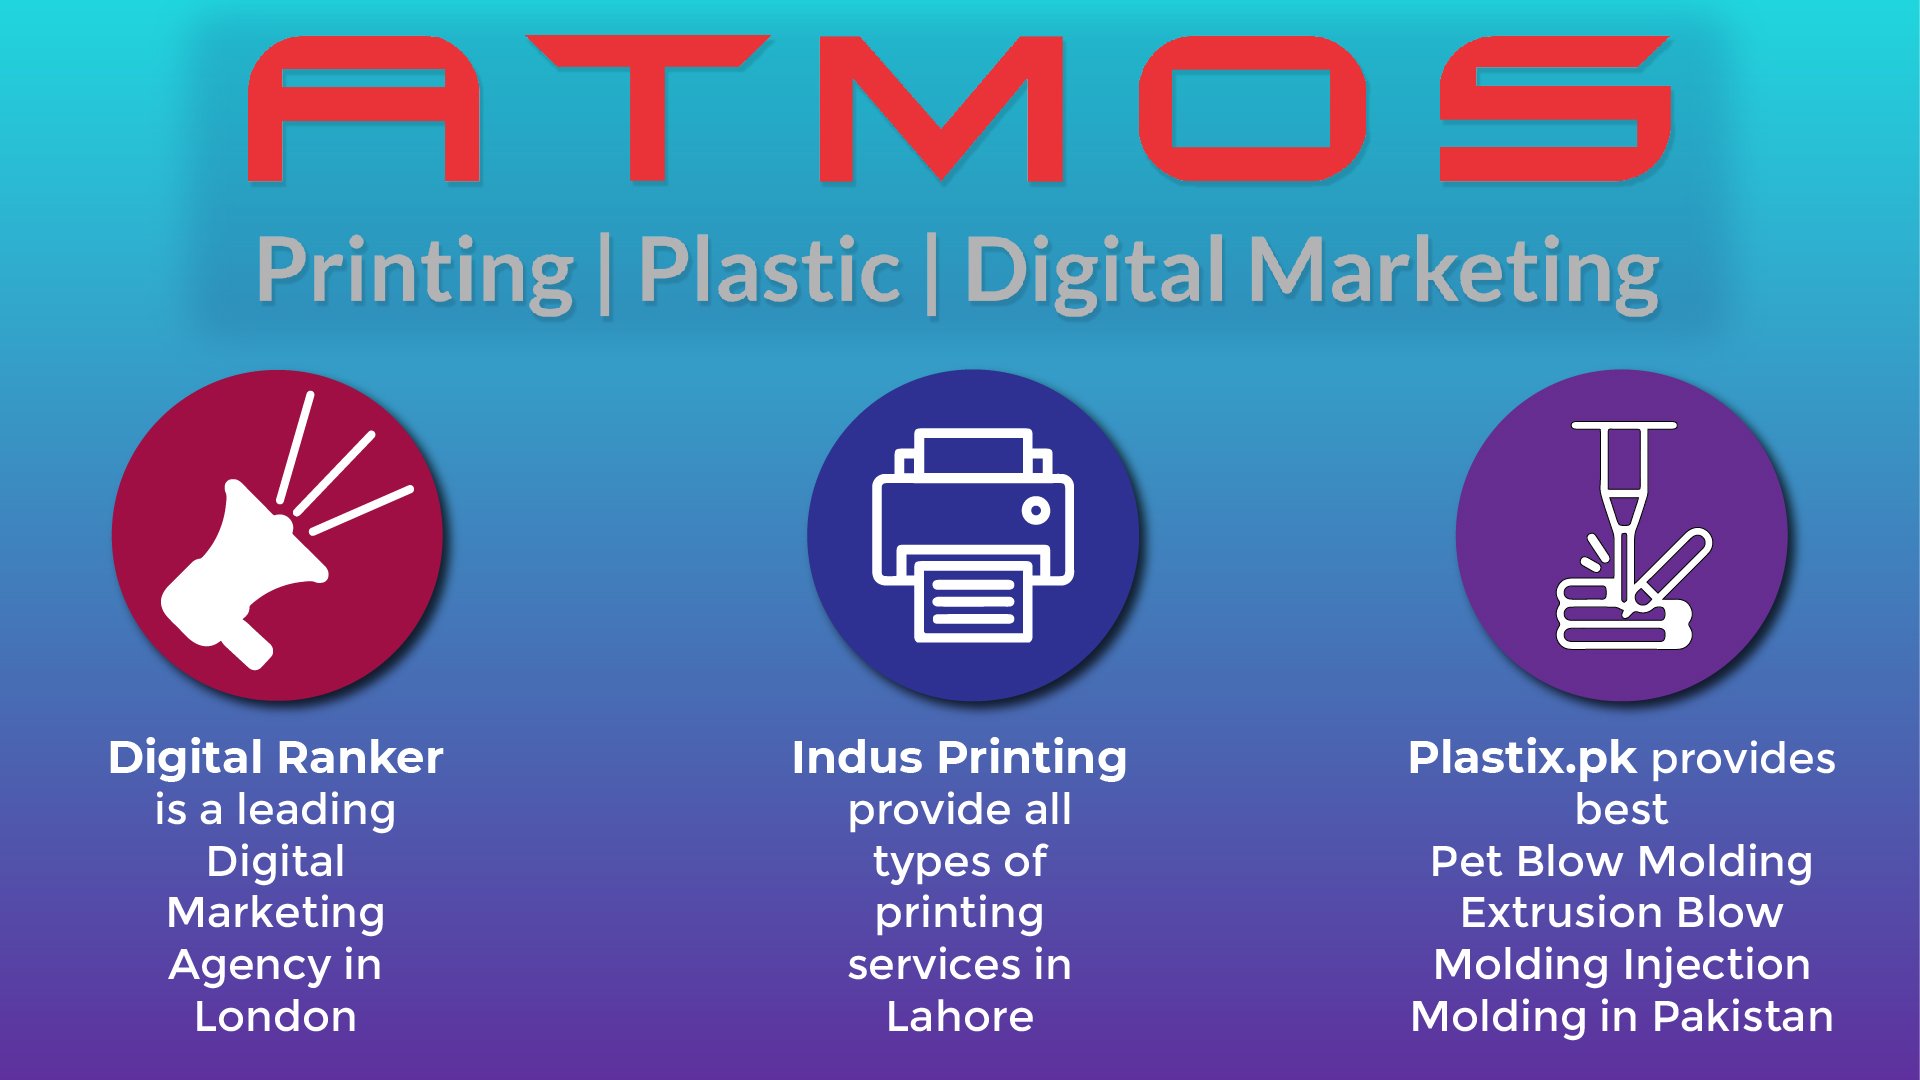 Atmos – Digital Marketing, Printing and Plastic Services cover